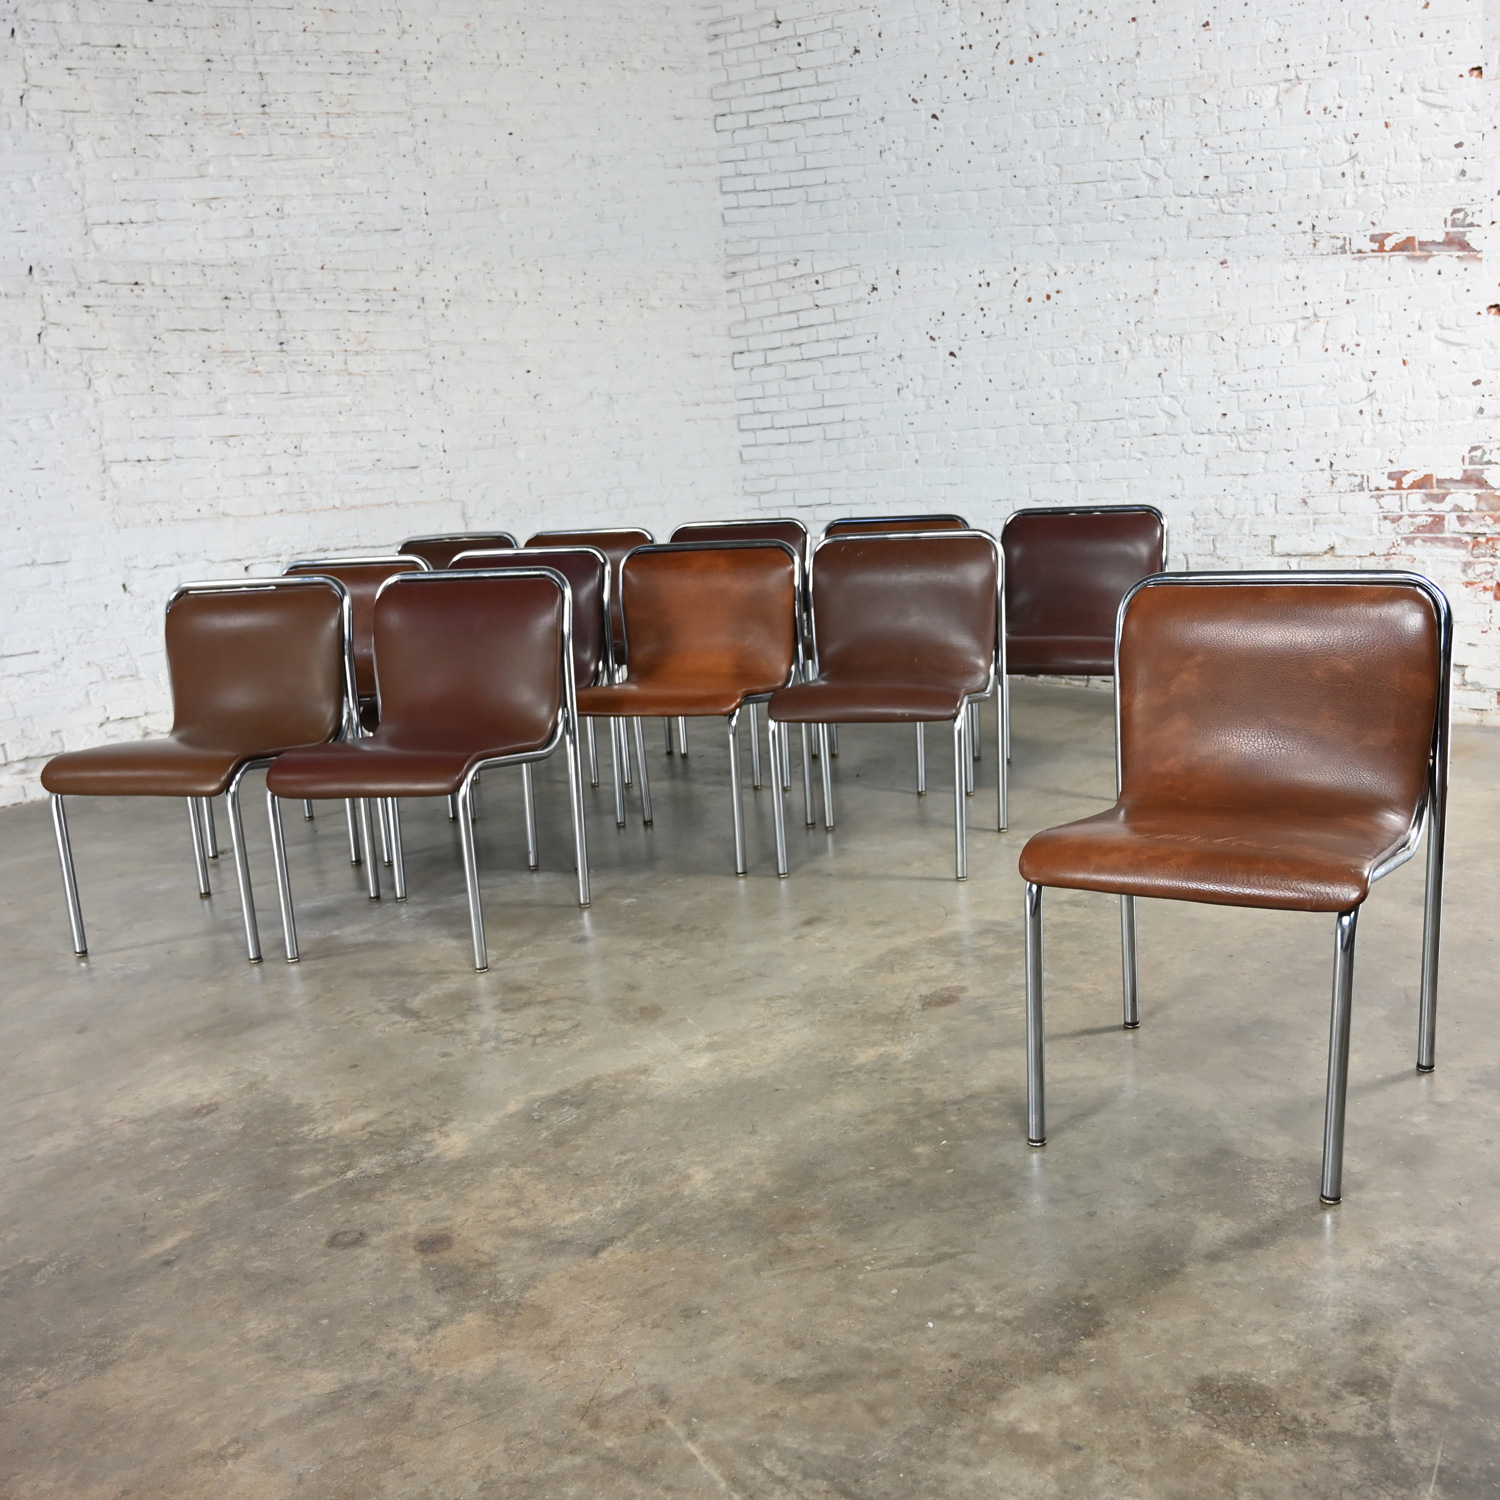 Mid to Late 20th Century Bauhaus to MCM Brown Vinyl & Chrome Scoop Chairs by Jansko Selling Separately